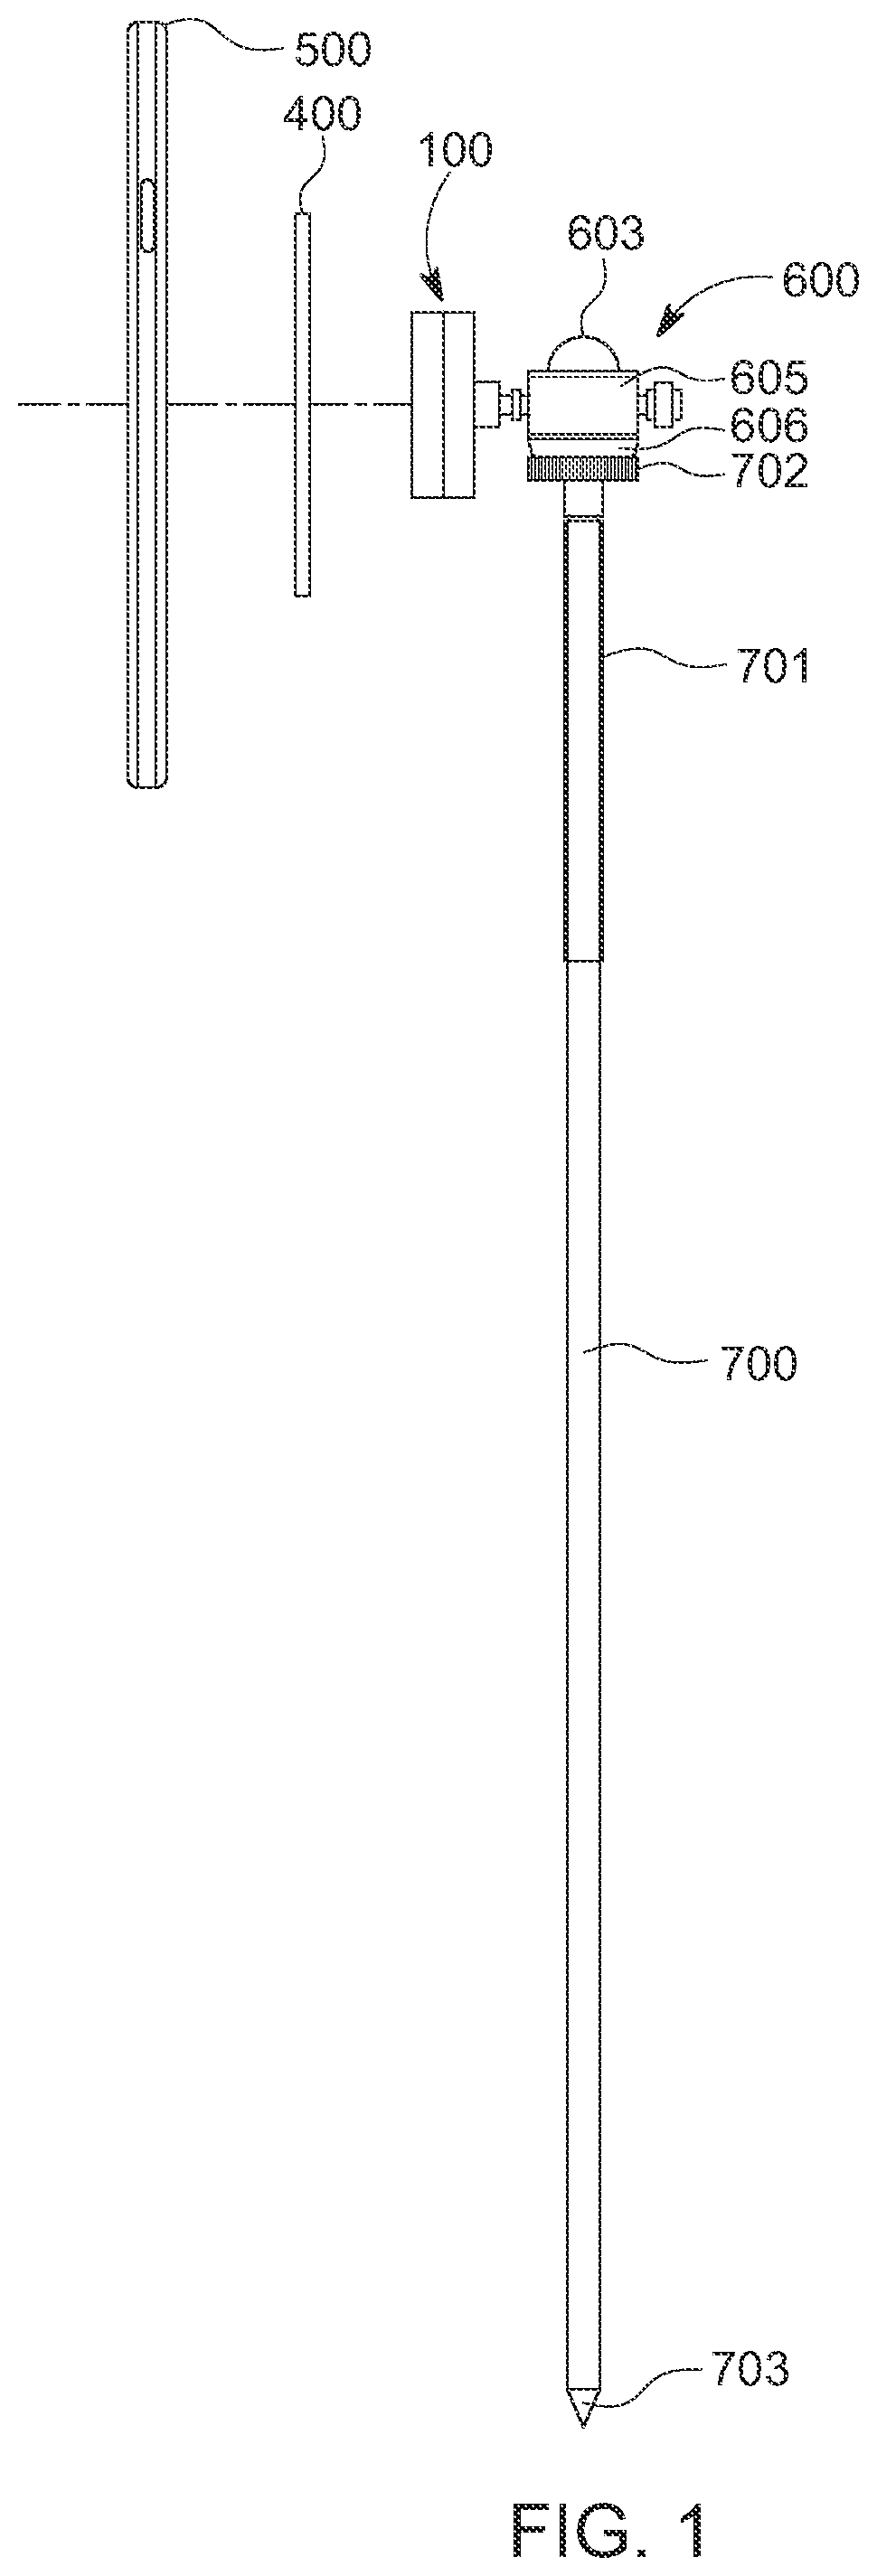 Magnetic monopod apparatus for supporting an electronic device